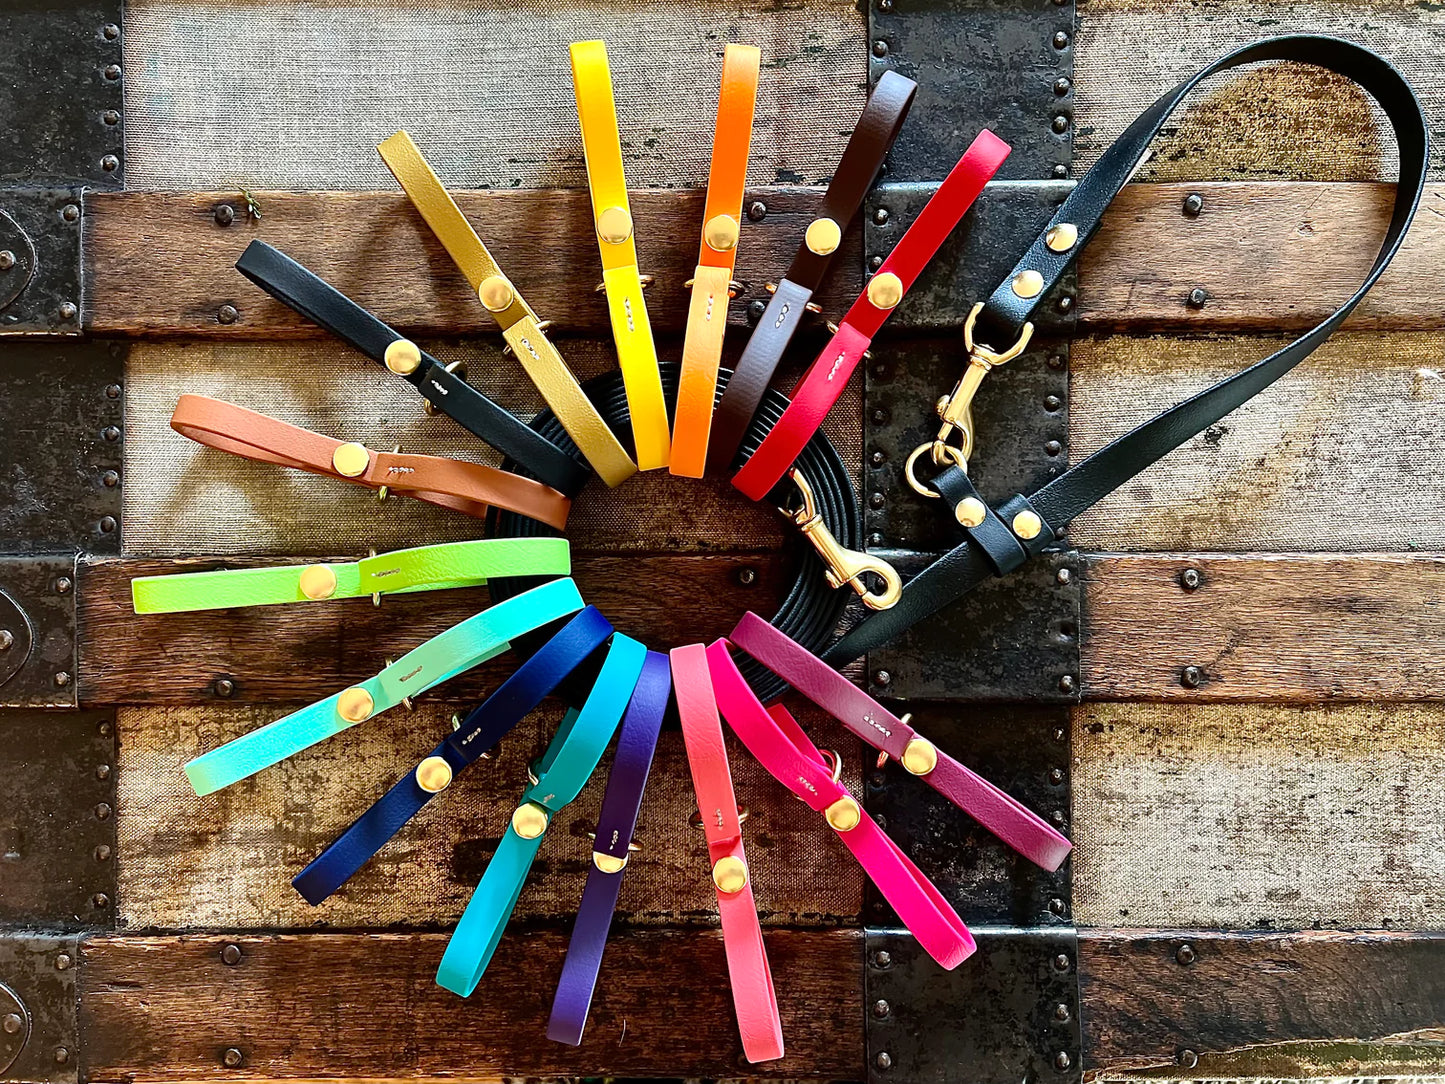 A group of colorful leather leashes laid on top of a wooden crate, perfect for the Trailblazing Tails: The Long Line Holder enthusiast or Your Whole Dog connoisseur.